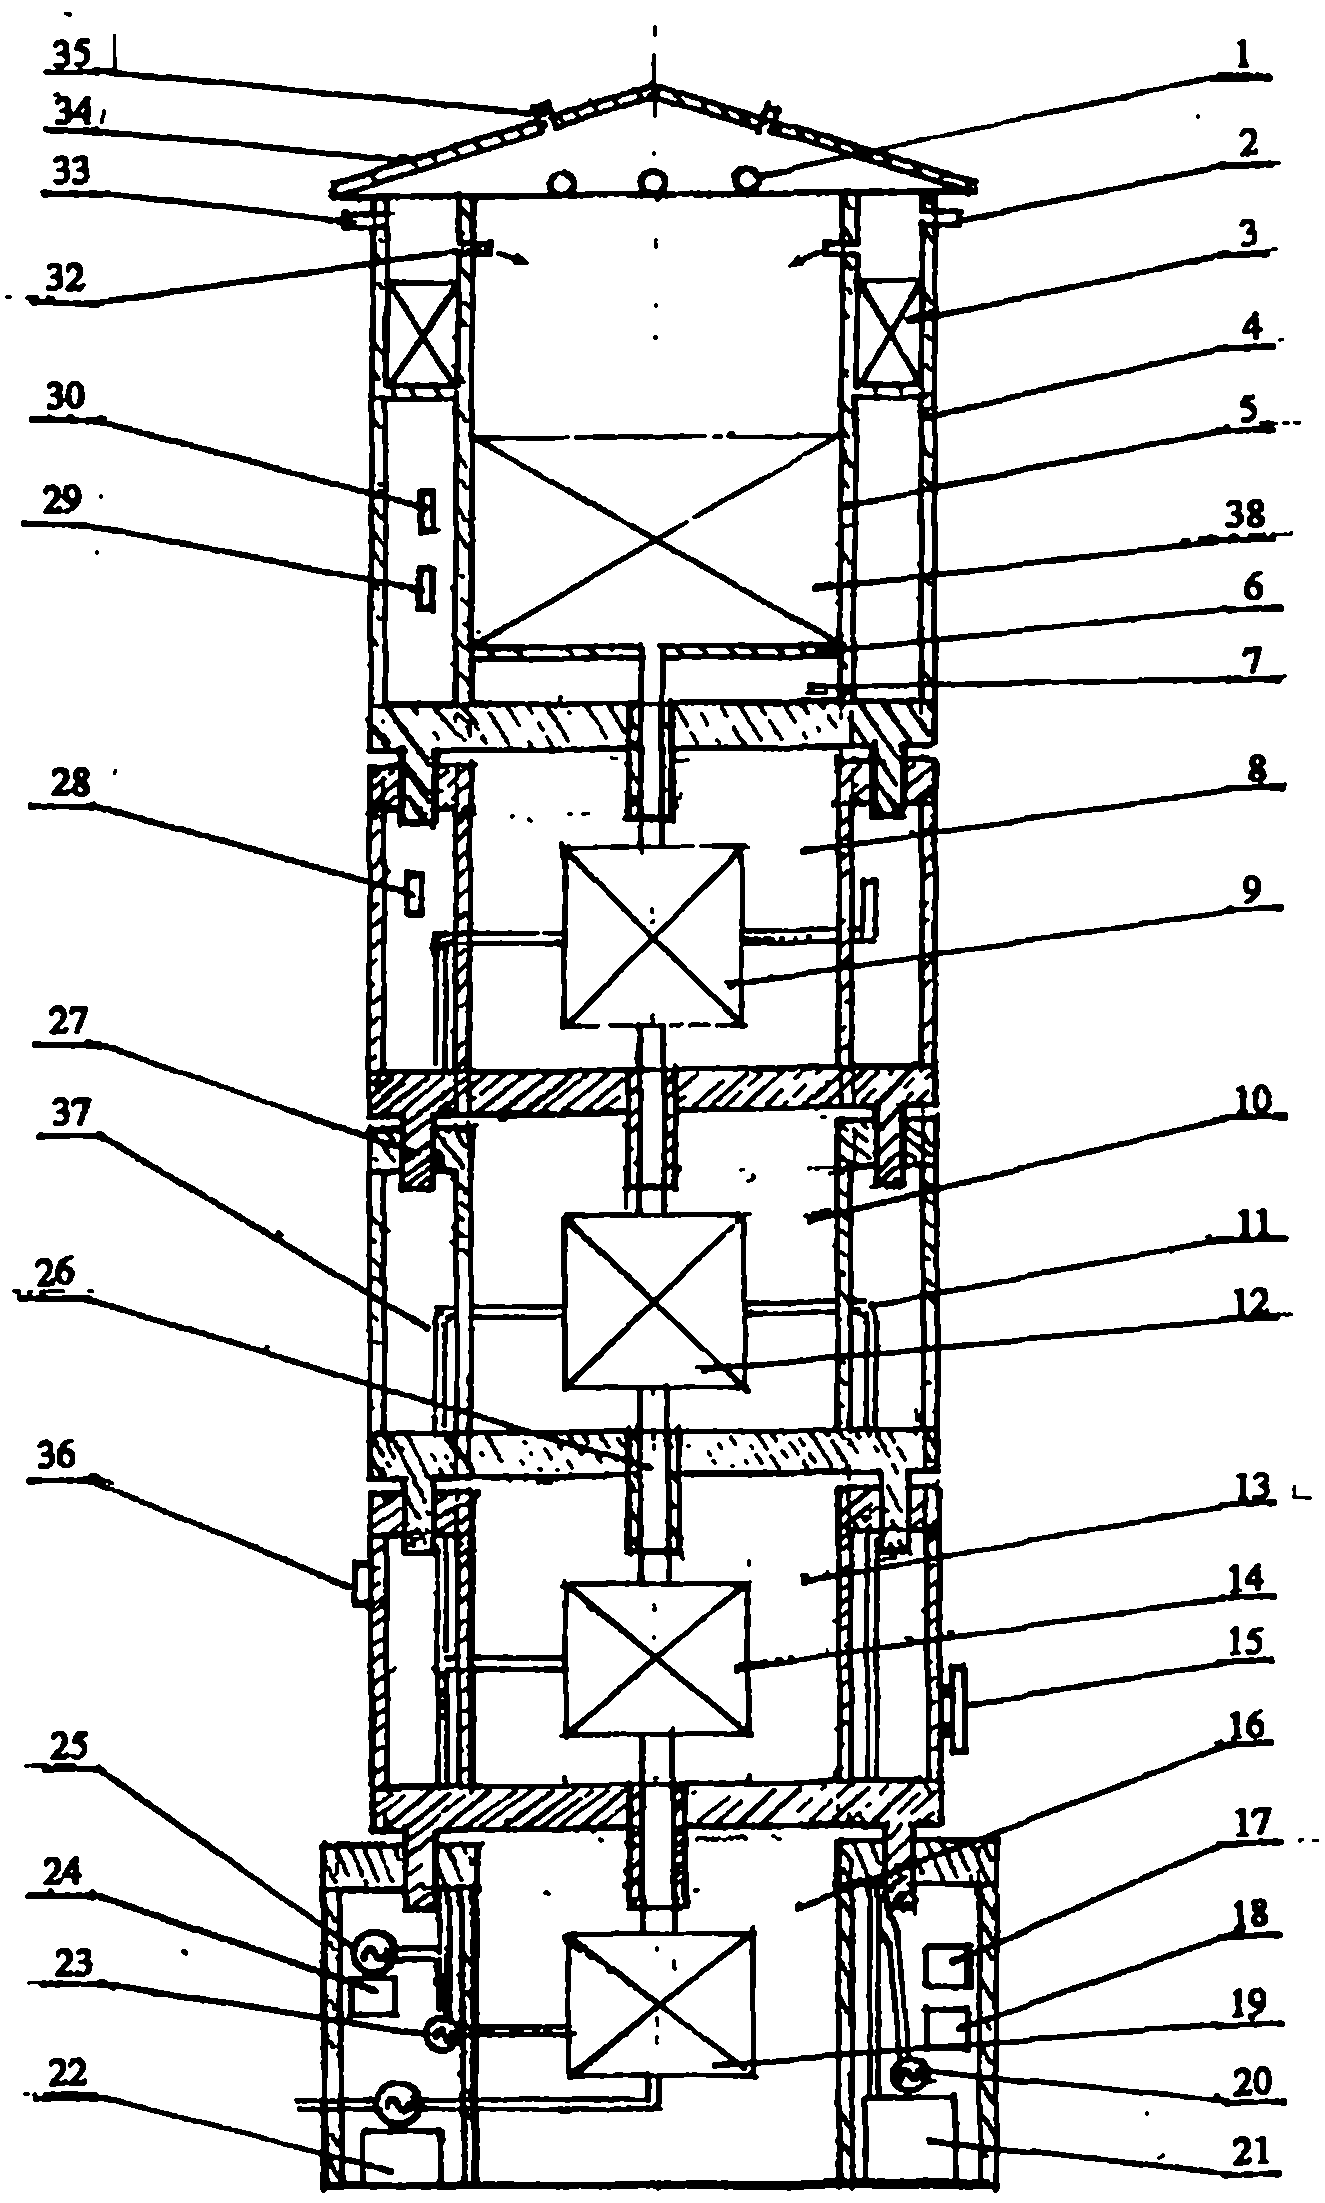 Method for filtering various water sources into drinking water